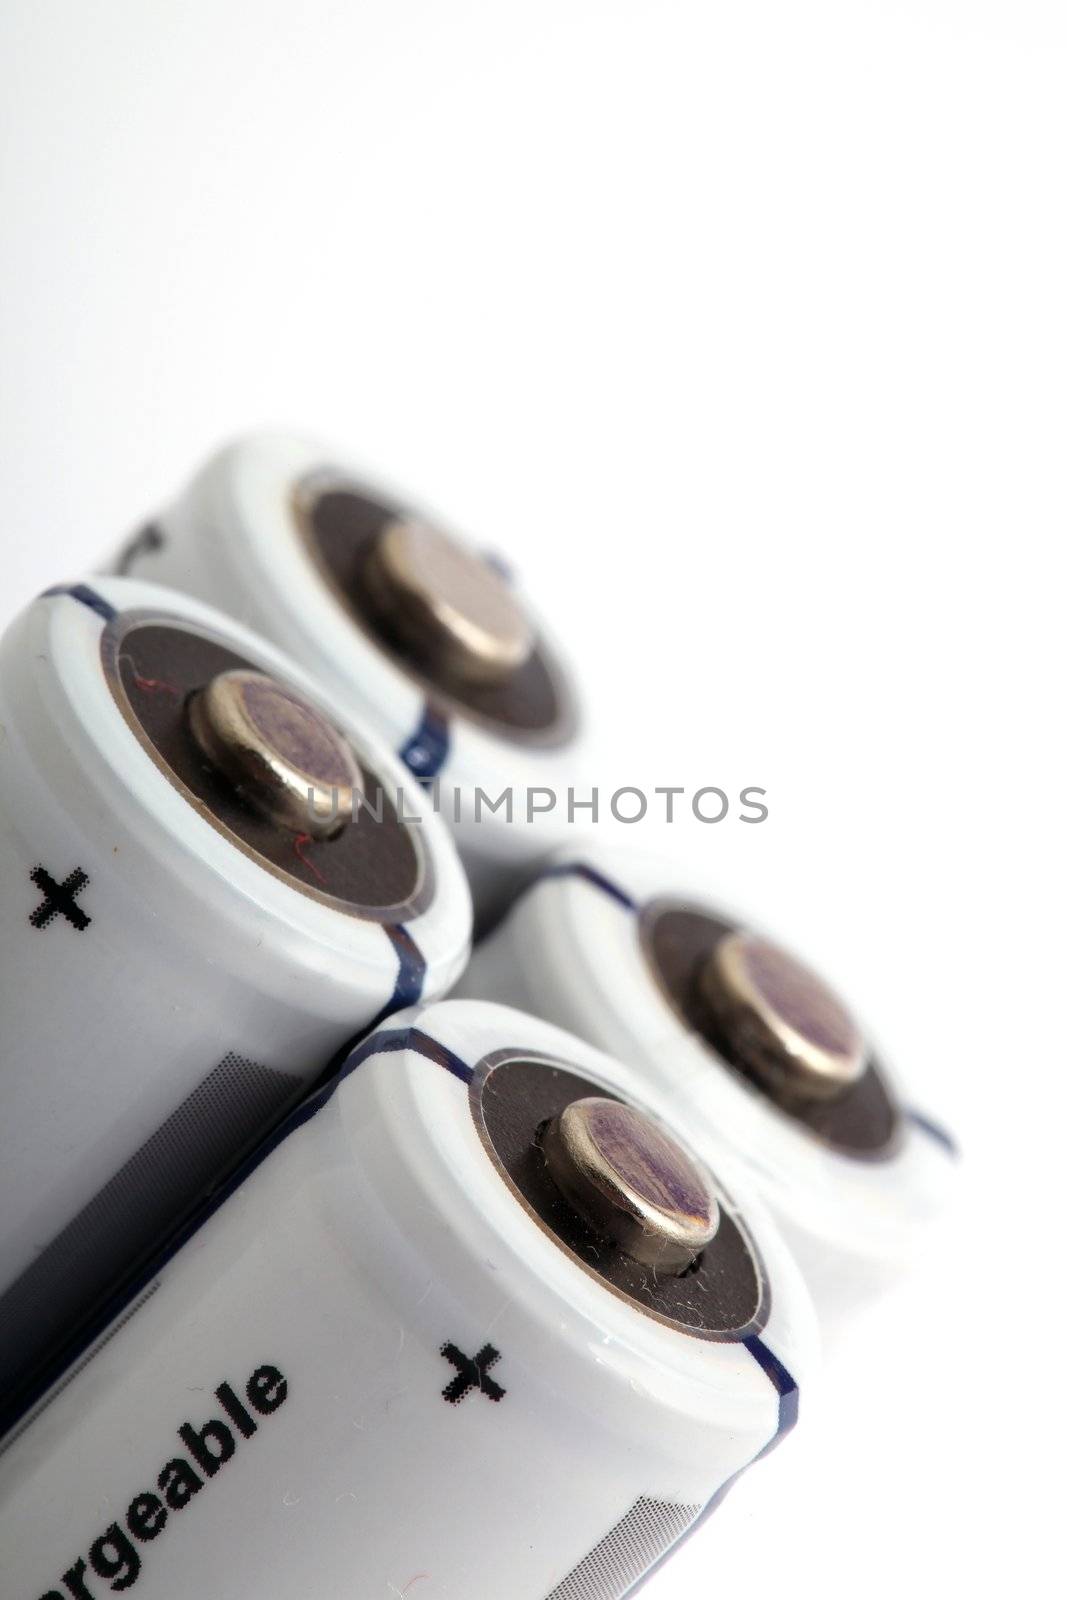 four white rechargeable batteries on white background with copyspace